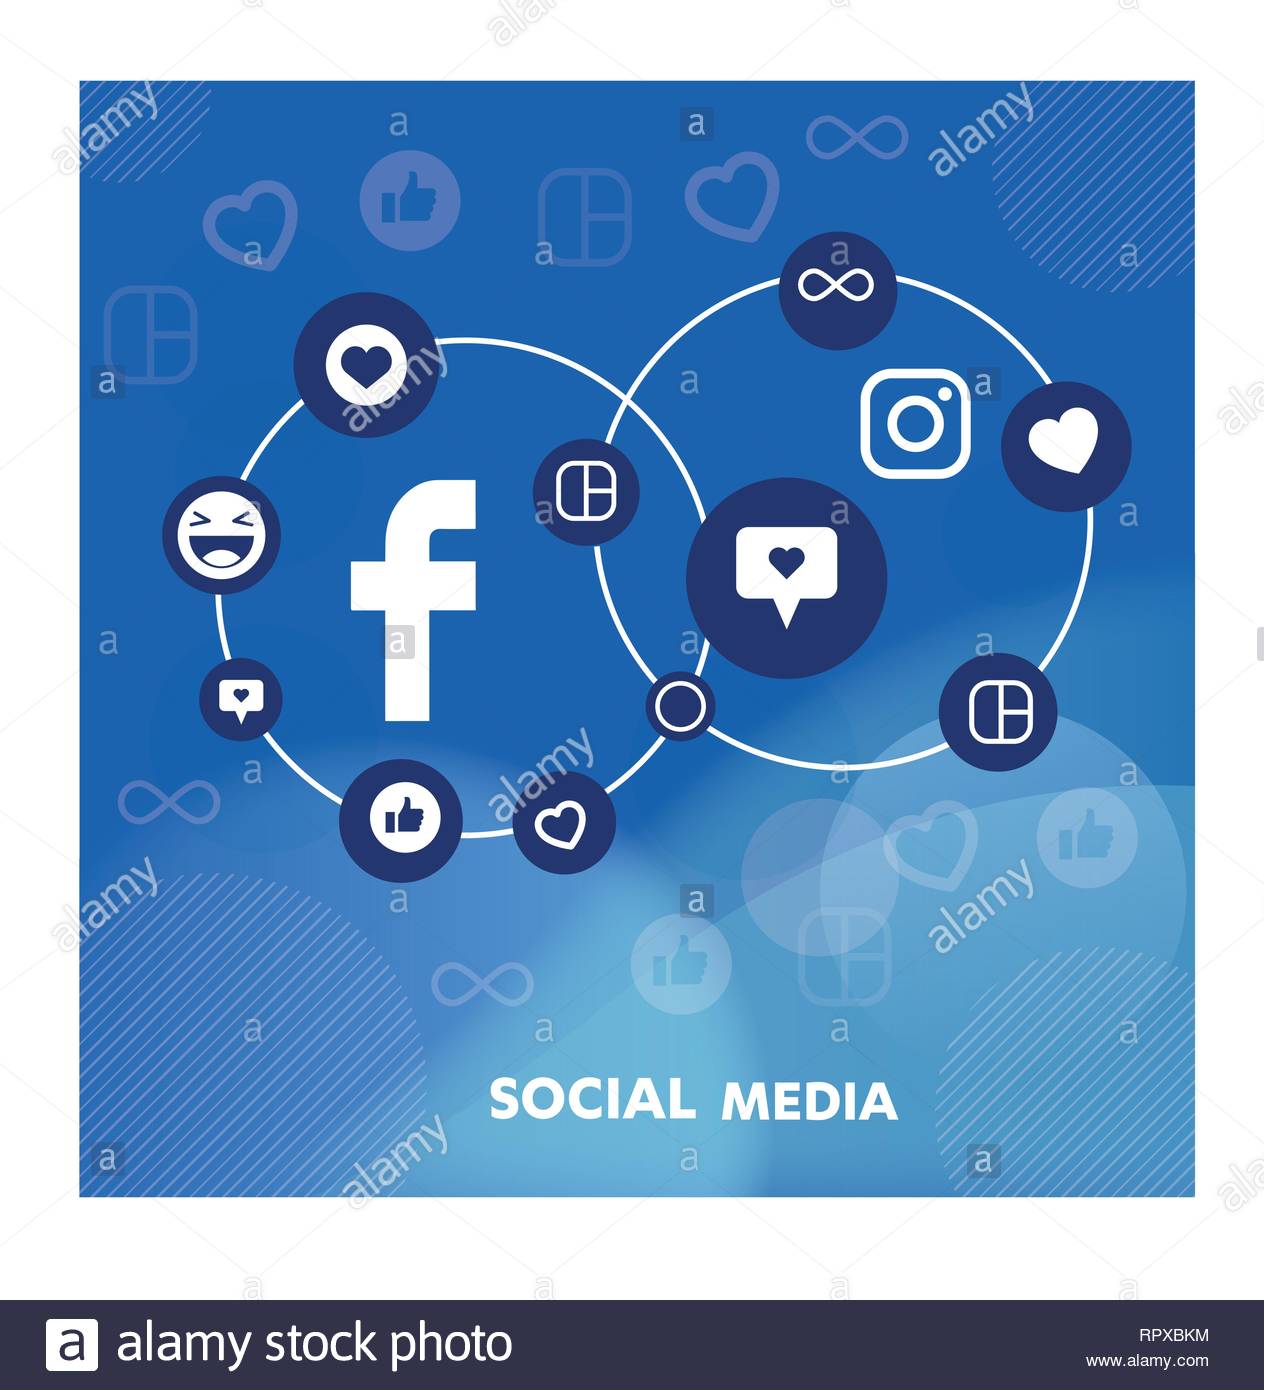 Flat Icons Technology Social Media Work Puter Concept